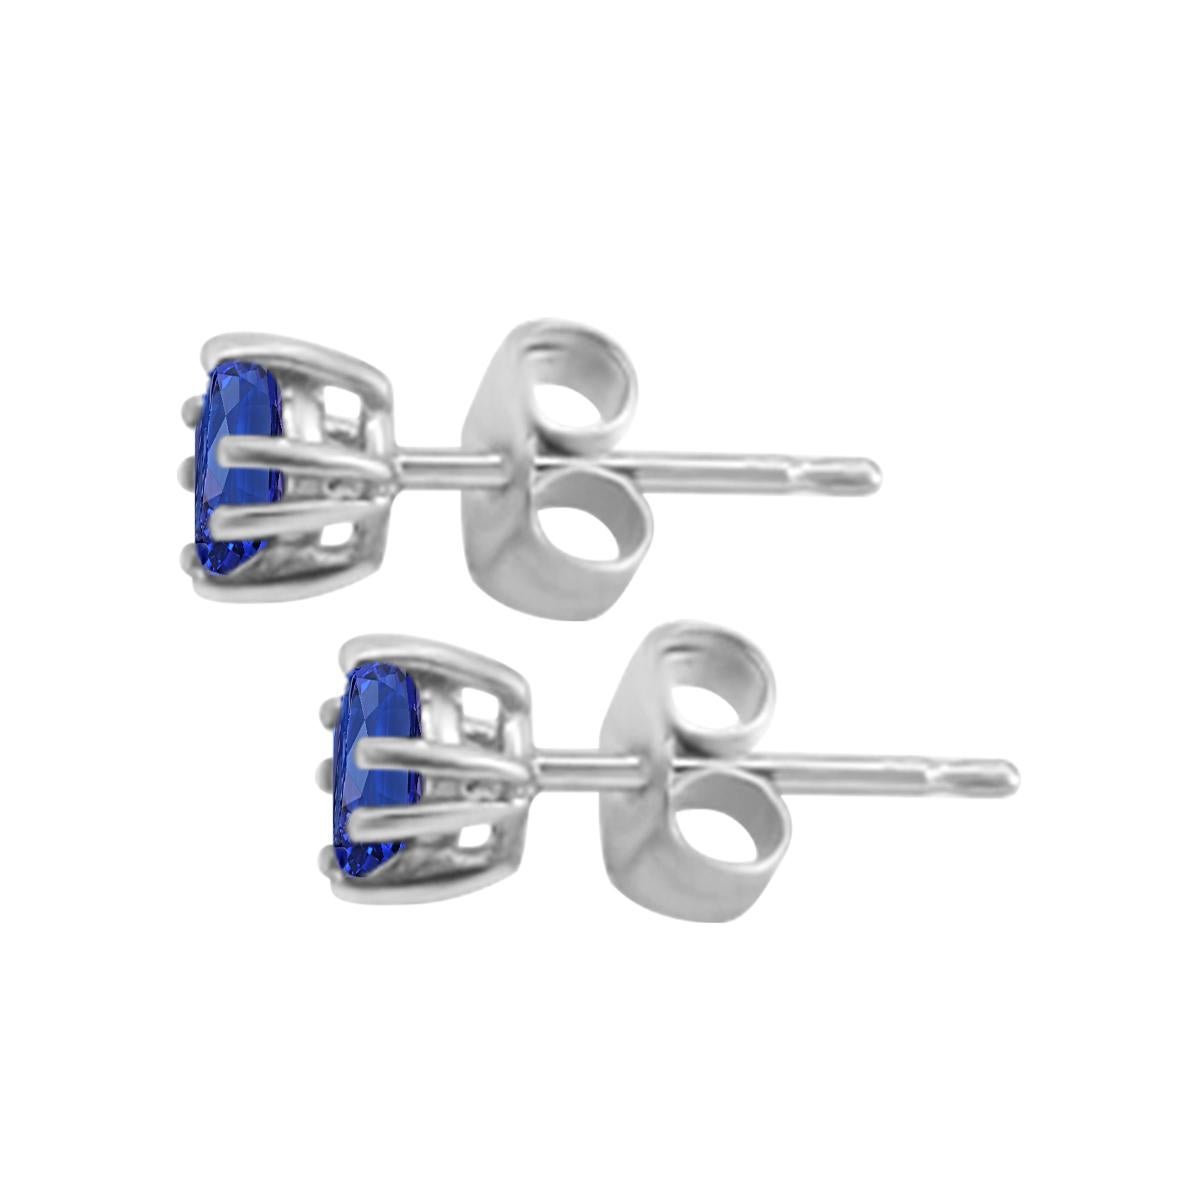 These Beautiful Stud Earrings Feature 3.5MM Princess Cut Tanzanite Gemstone For An Elegant And Chic Look.  Perfectly Settle In 14k White Gold. These Classic Earrings Are Illuminating From Afar, Accessories That Will Confidently Earn You Many